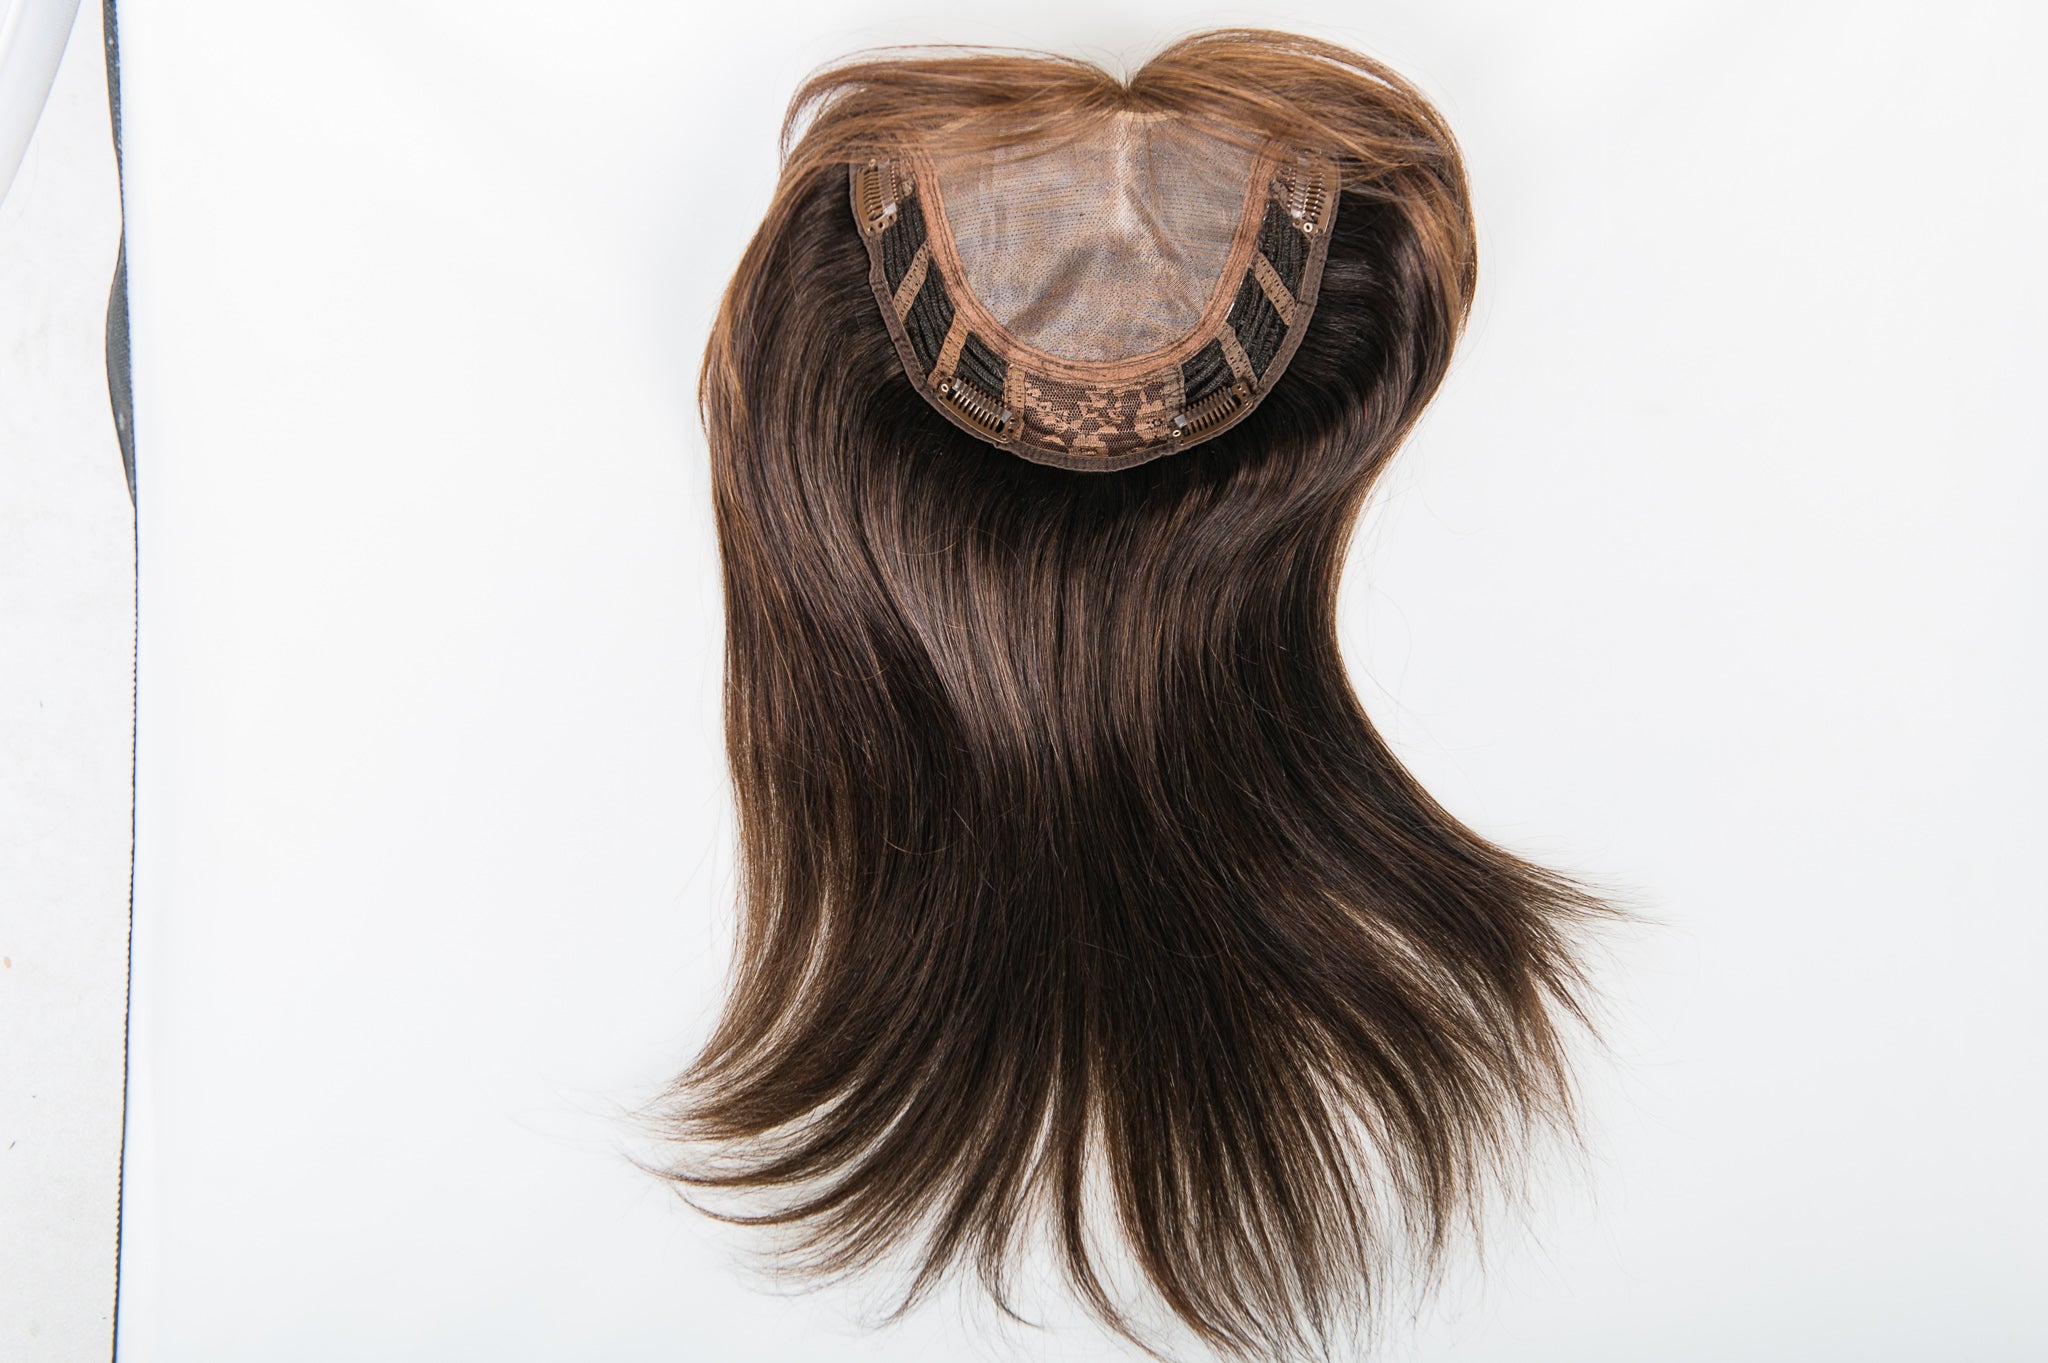 Touch 'n Go - Remy Human Hair, Topper